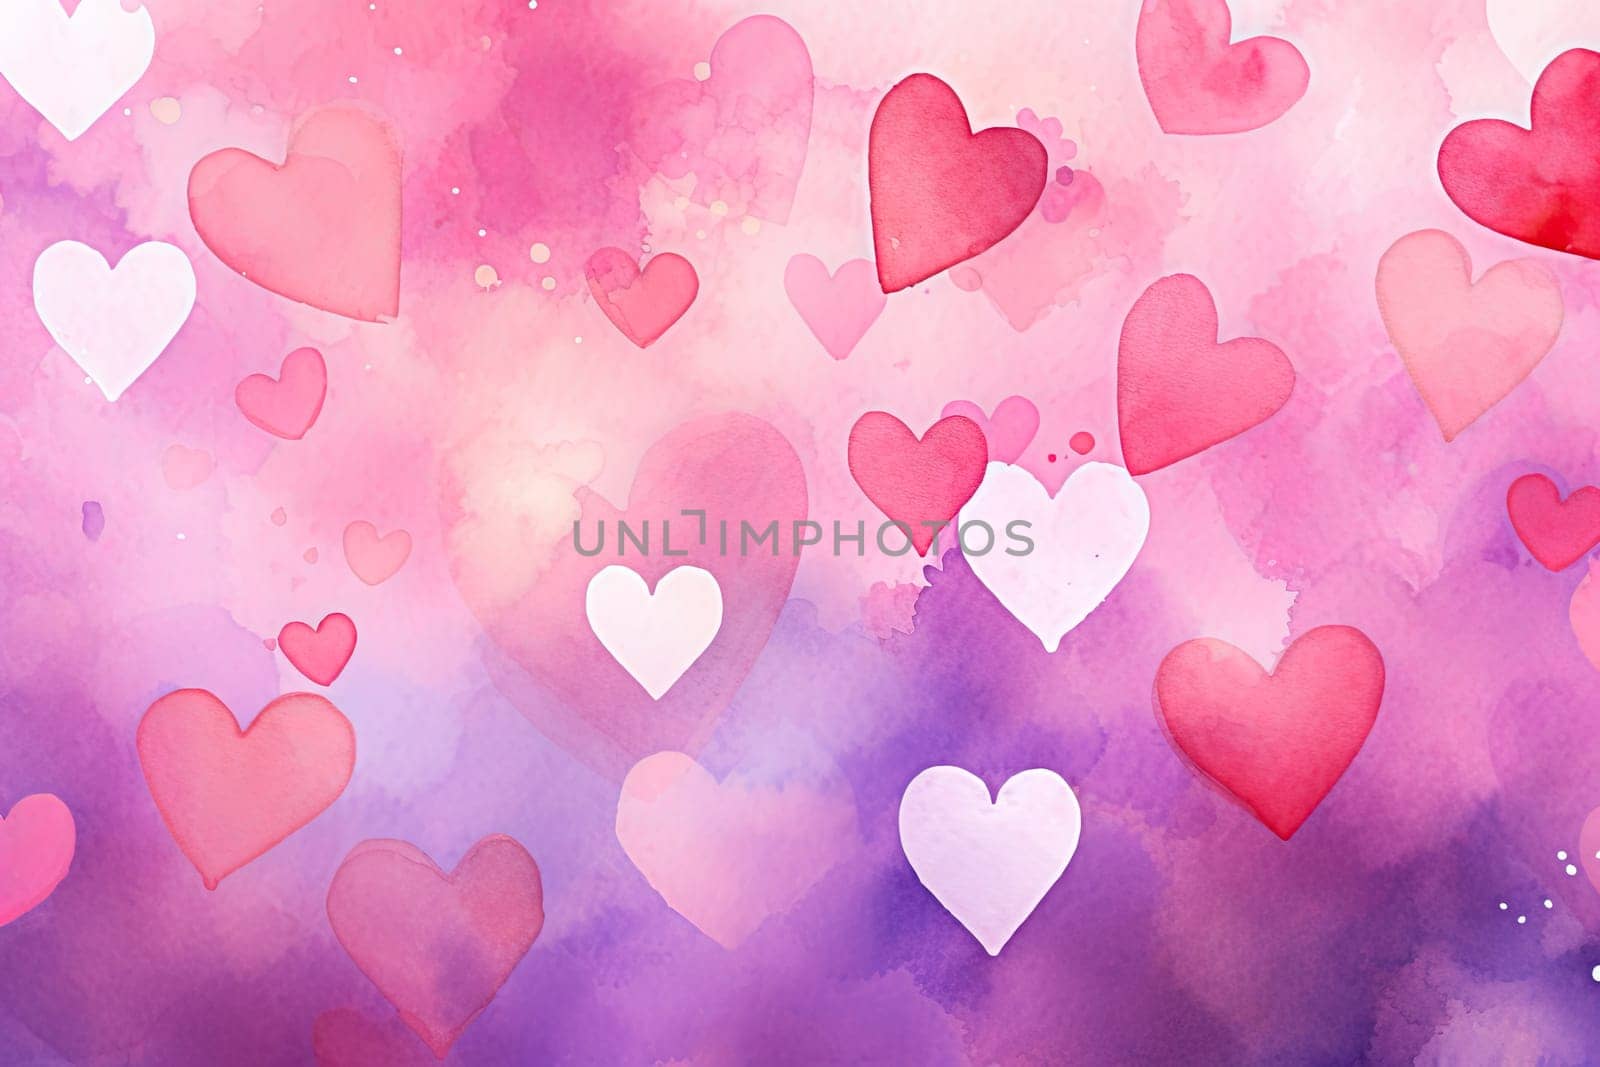 watercolor illustration of hearts on very soft and sweet pastel color abstract background.